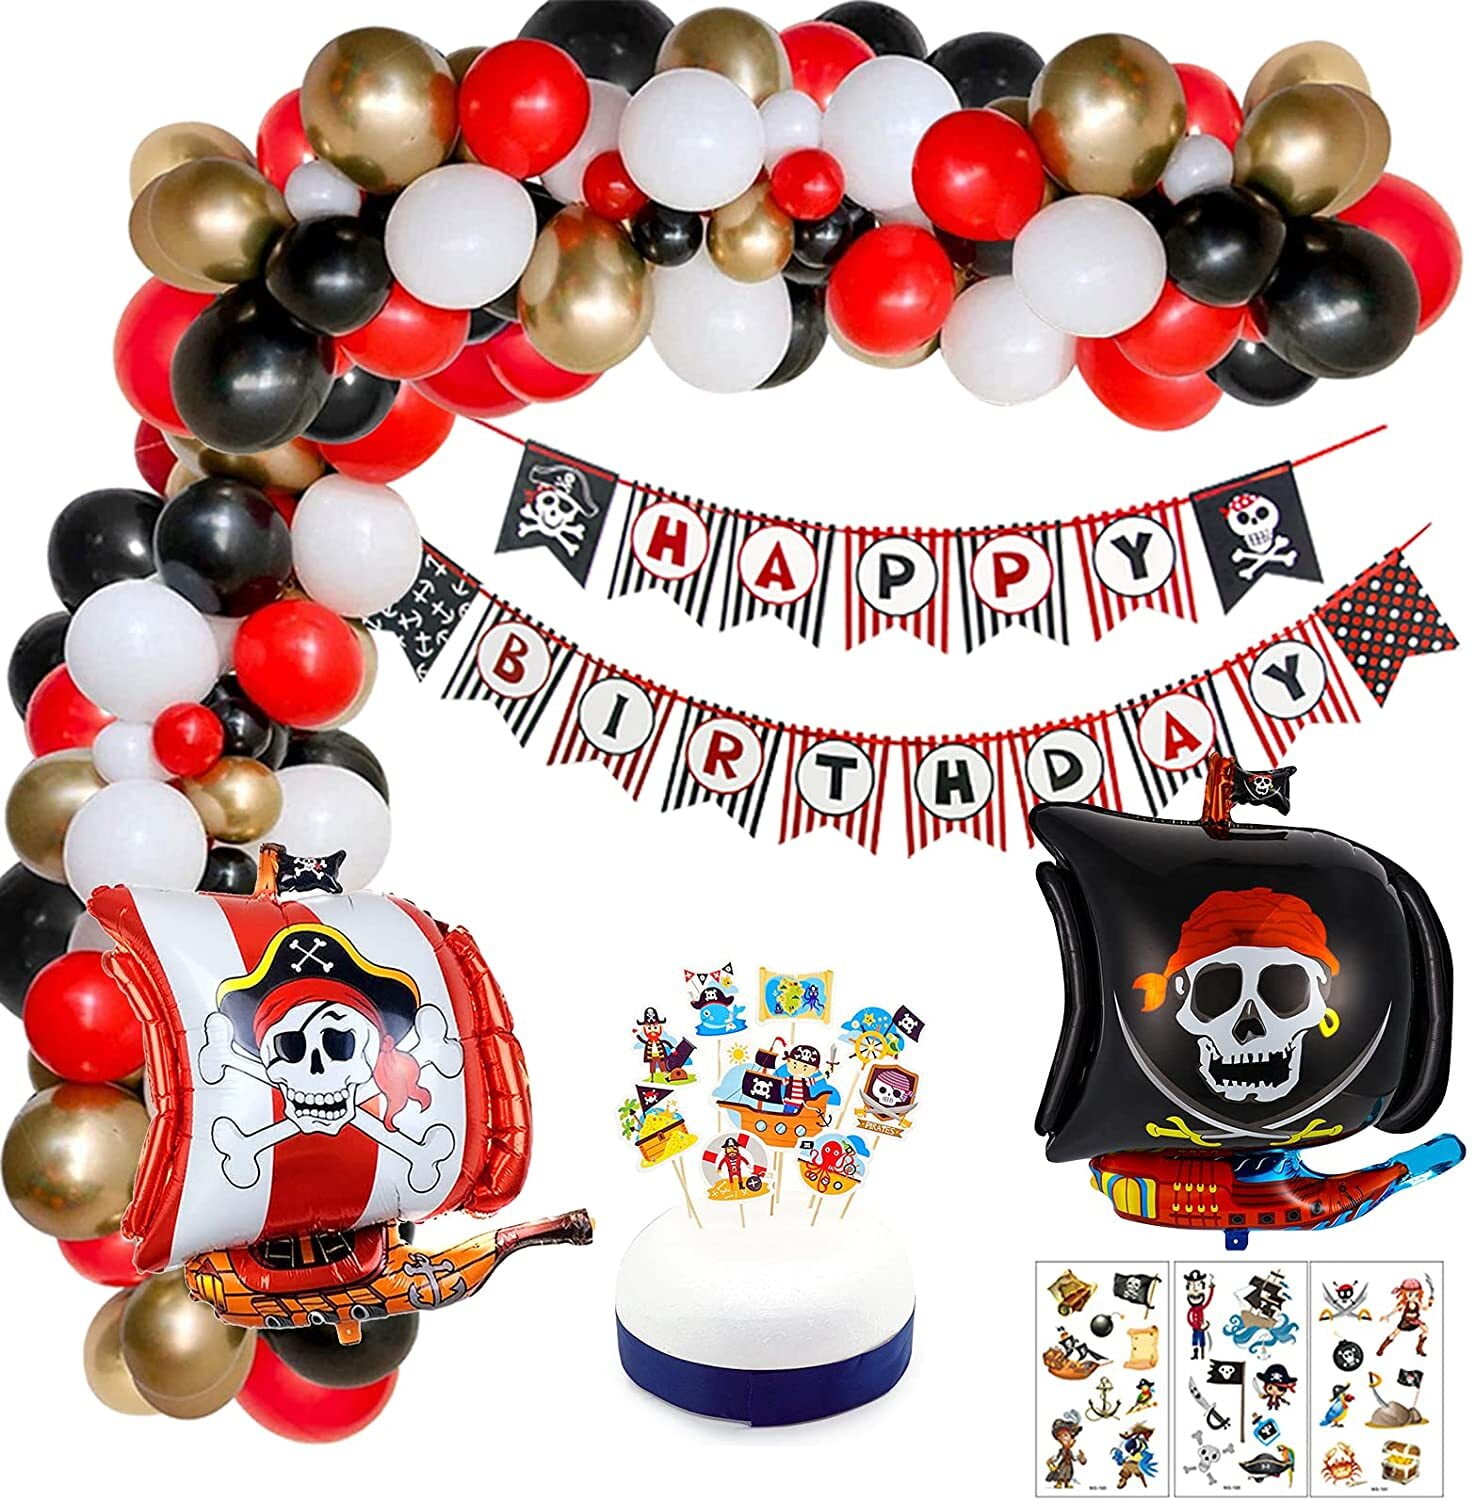 PIRATES OF THE CARIBBEAN Stranger Tides HAPPY BIRTHDAY BANNER ~ Party Supplies 